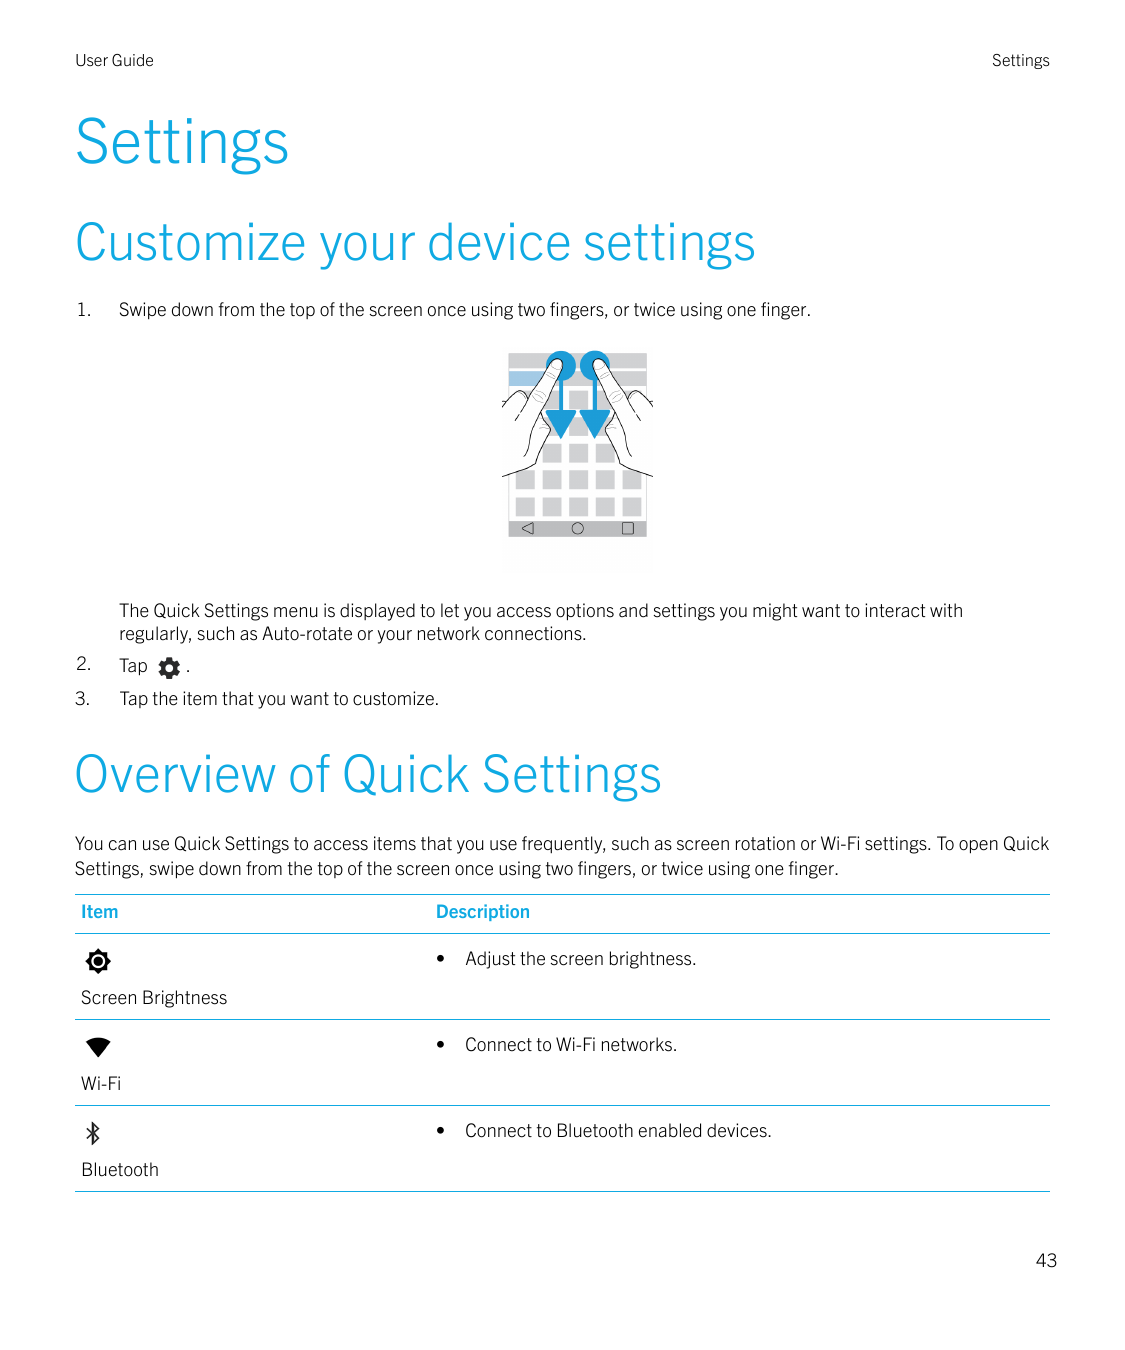 User GuideSettingsSettingsCustomize your device settings1.Swipe down from the top of the screen once using two fingers, or twice